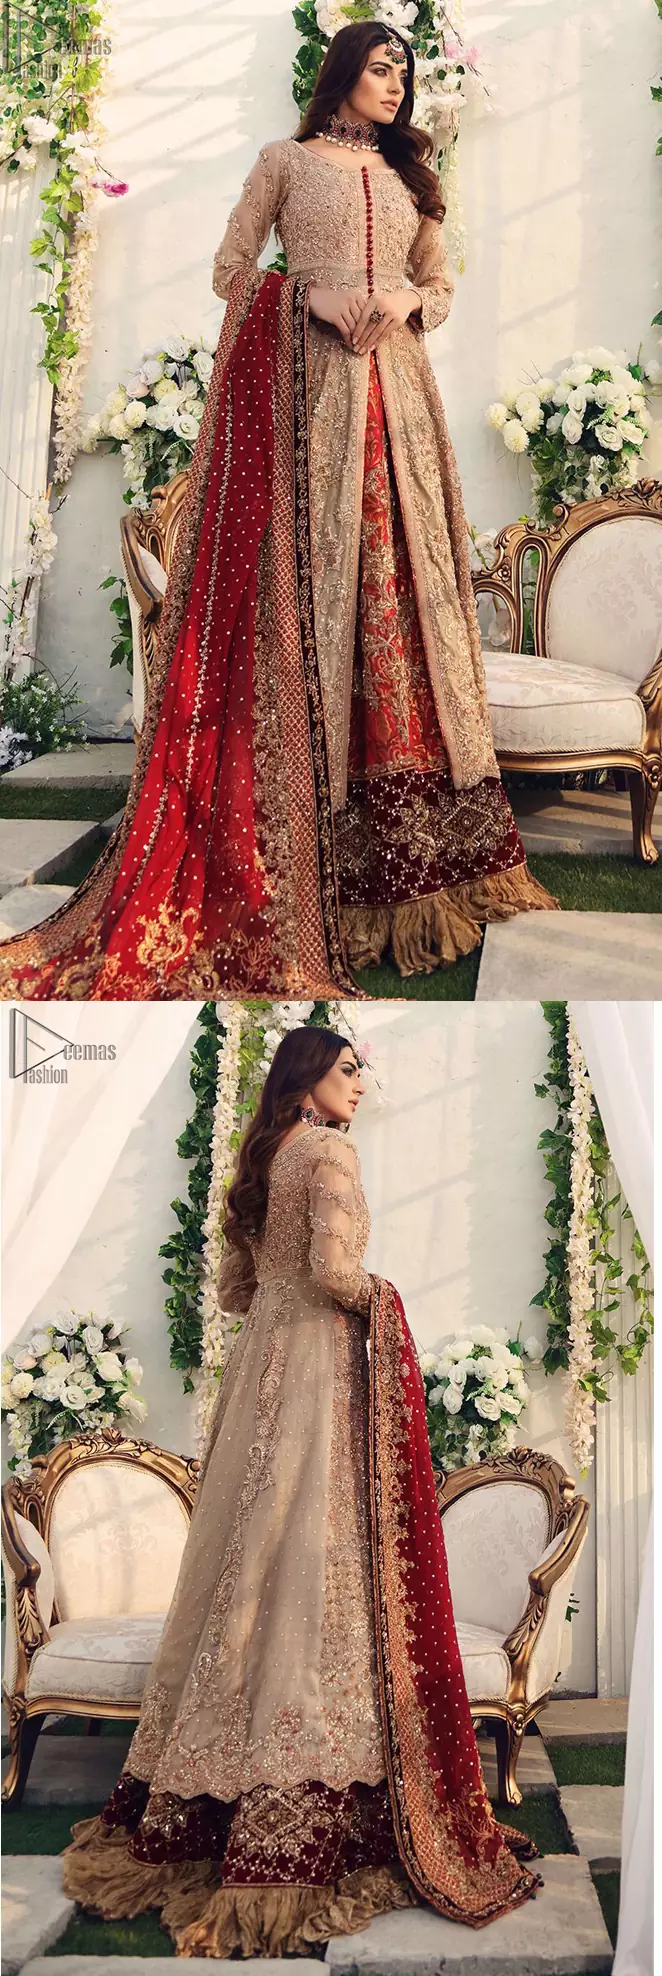 Gussy up the glamour with this intricately embroidered fawn ensemble. Fully embroidered bodice accentuated with floral motifs and finished with scalp borders. Look breathtakingly stylish in this Nikah wear embroidered fawn front open Pishwas. Nikah Wear - Red Lehenga - Fawn Front Open Pishwas.